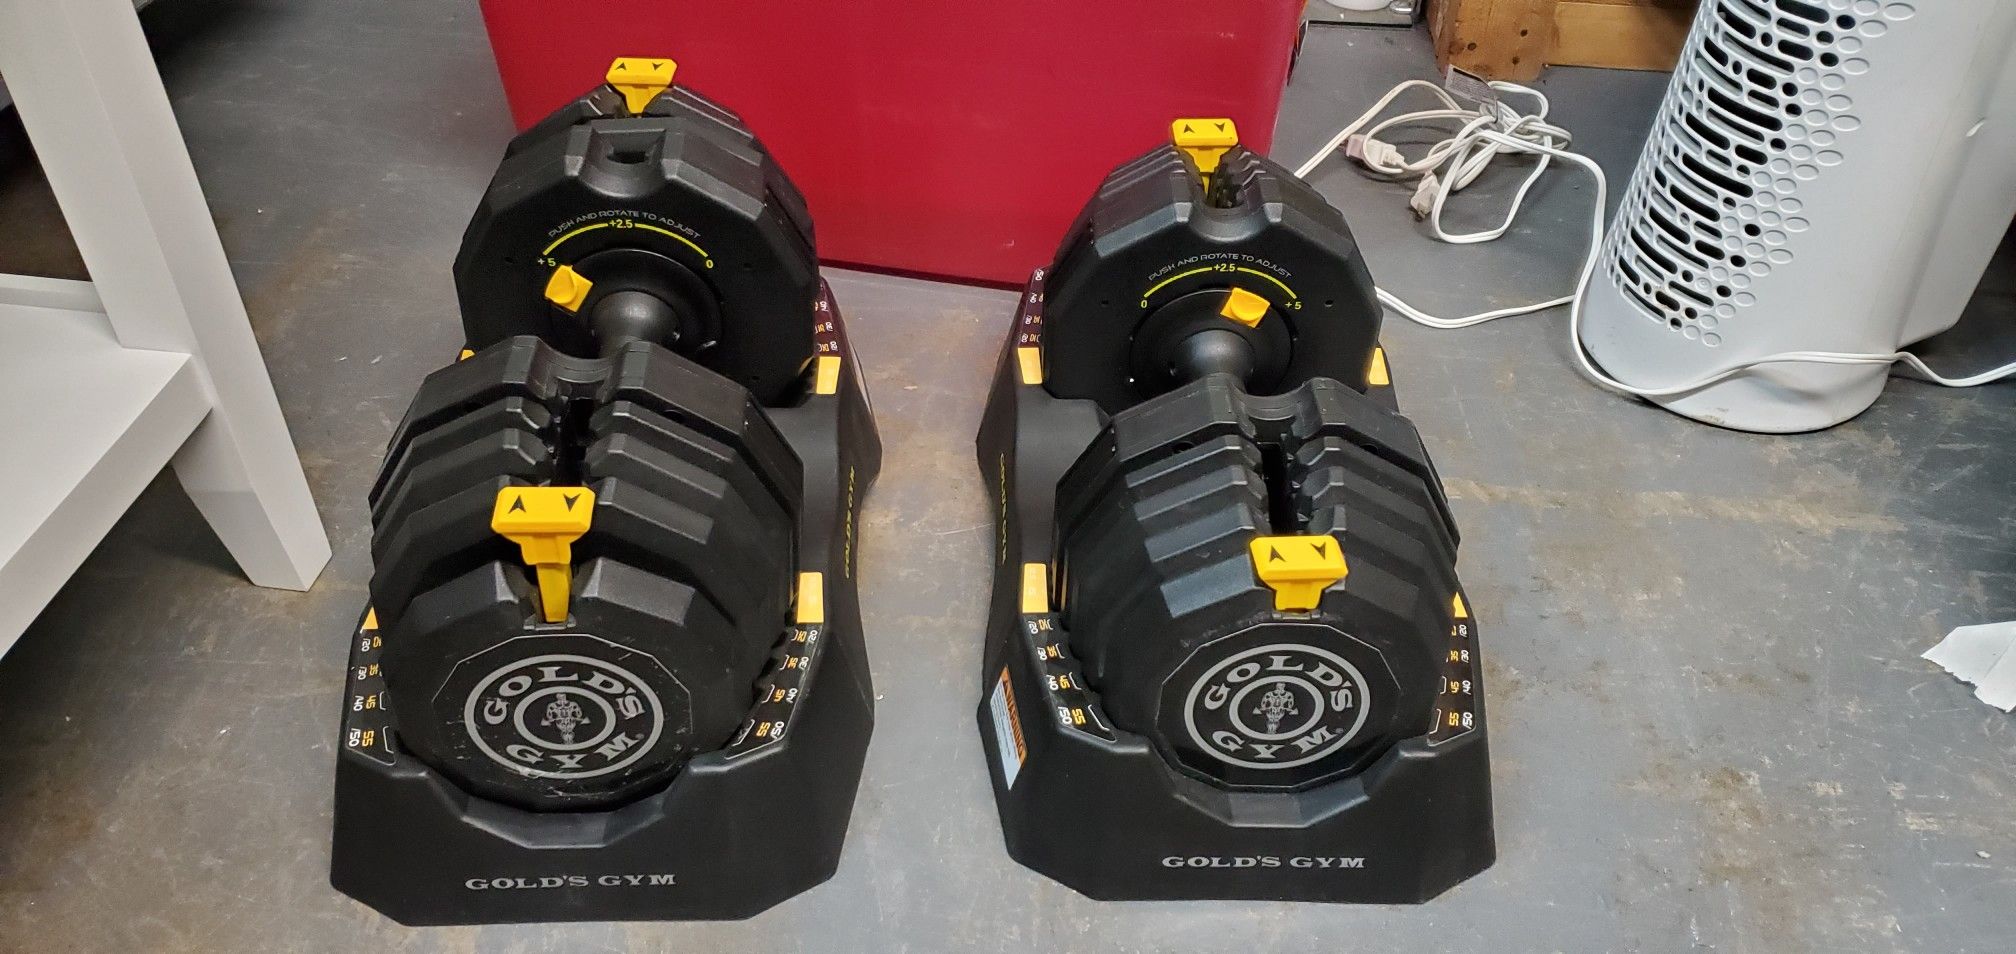 New Golds Gym 110lbs Sele t A Weight Dumbbells